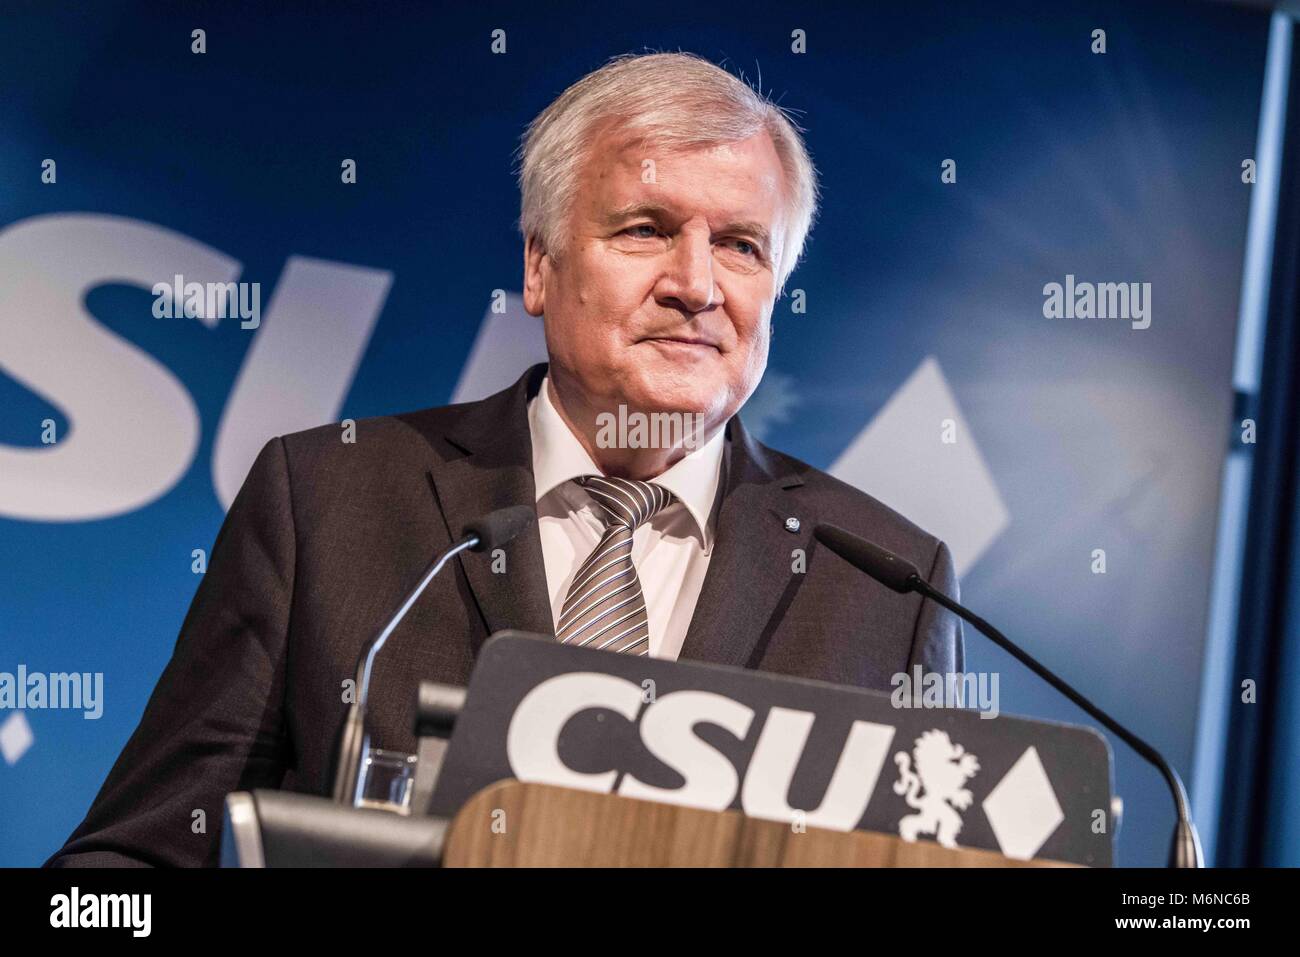 Munich, Bavaria, Germany. 5th Mar, 2018. The future German Heimatminister (Homeland) Horst Seehofer unveiled the CSU cabinet appointees at a press conference at the CSU offices in Munich. As of the ratification of the SPD entering the GroKo Grand Coalition, Seehofer has confirmed the acceptance of the cabinet position. Credit: ZUMA Press, Inc./Alamy Live News Stock Photo